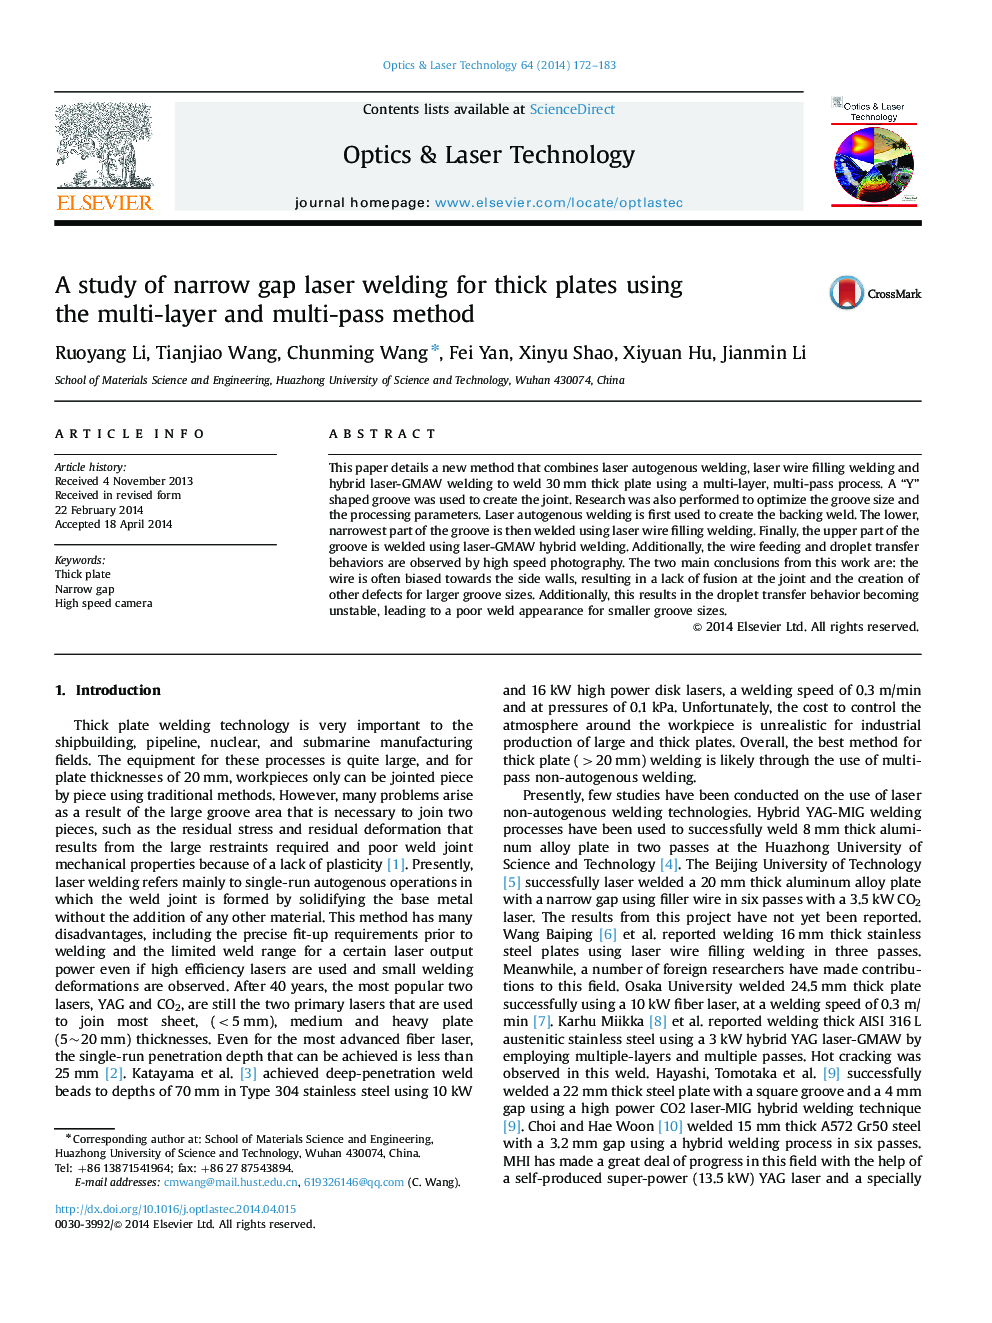 A study of narrow gap laser welding for thick plates using the multi-layer and multi-pass method